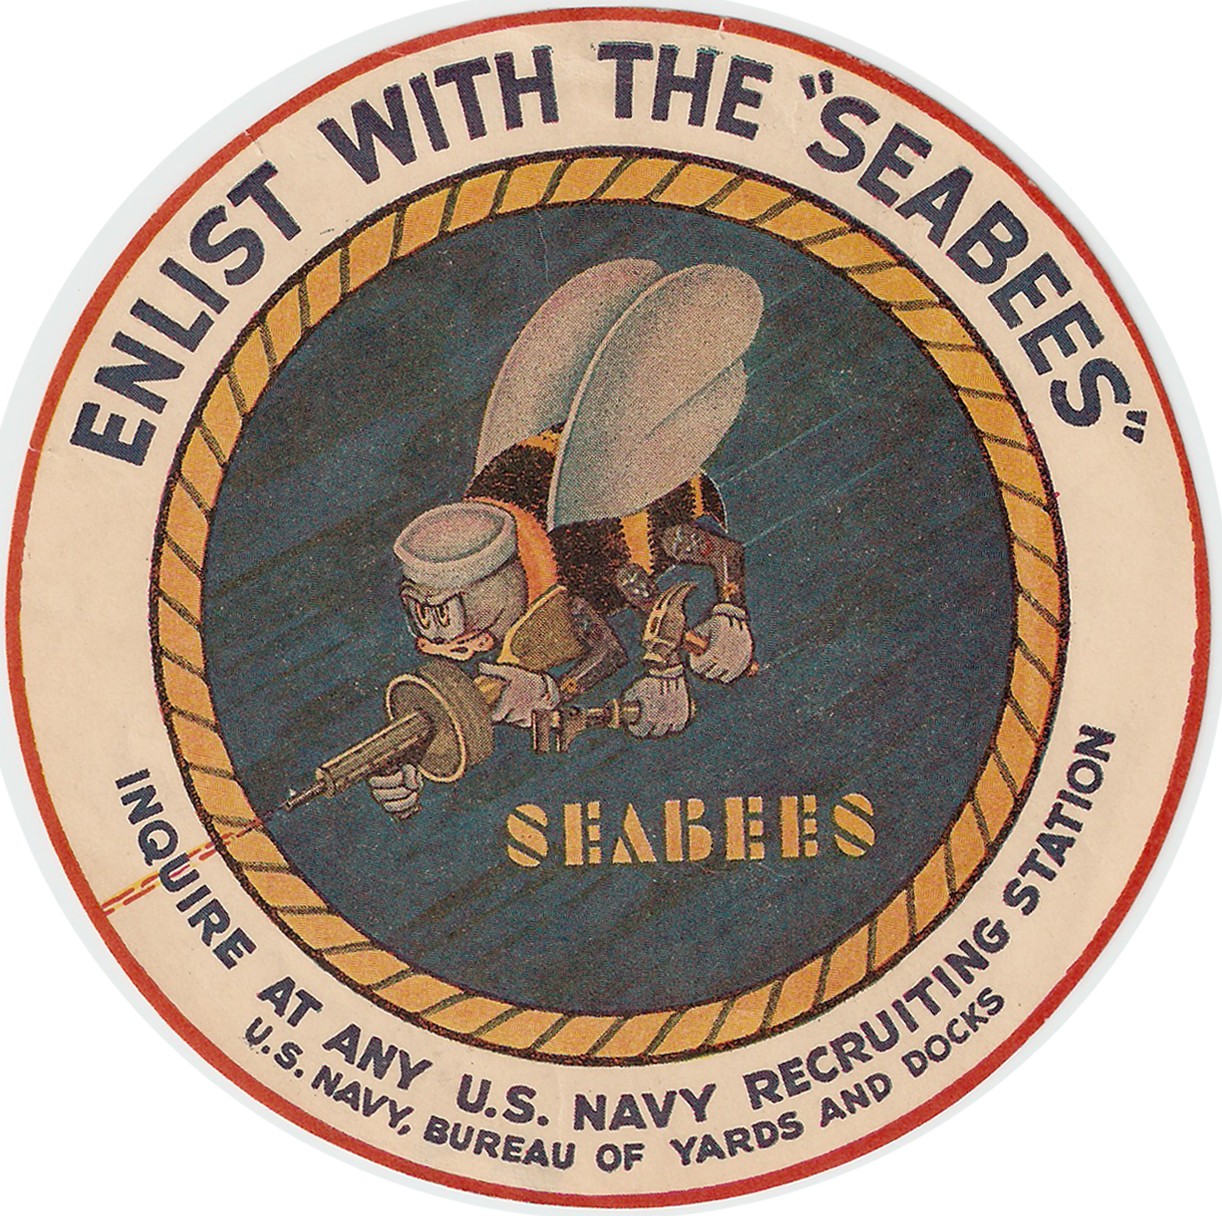 Enlist with the Seabees sticker2